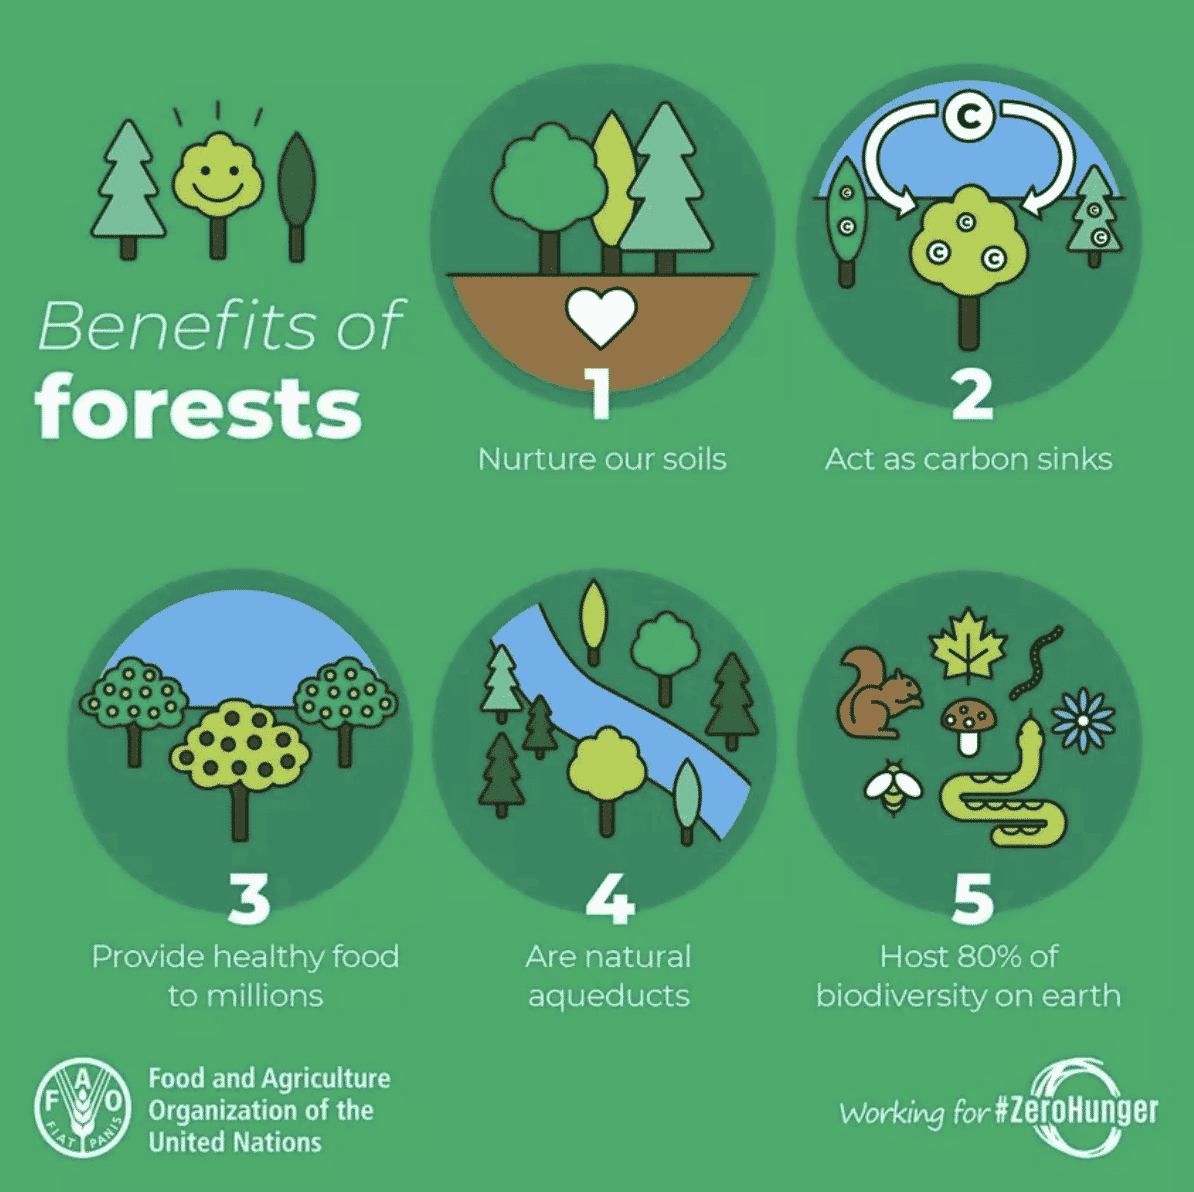 5 Things You Might Not Know About Forests – But Should - EcoWatch